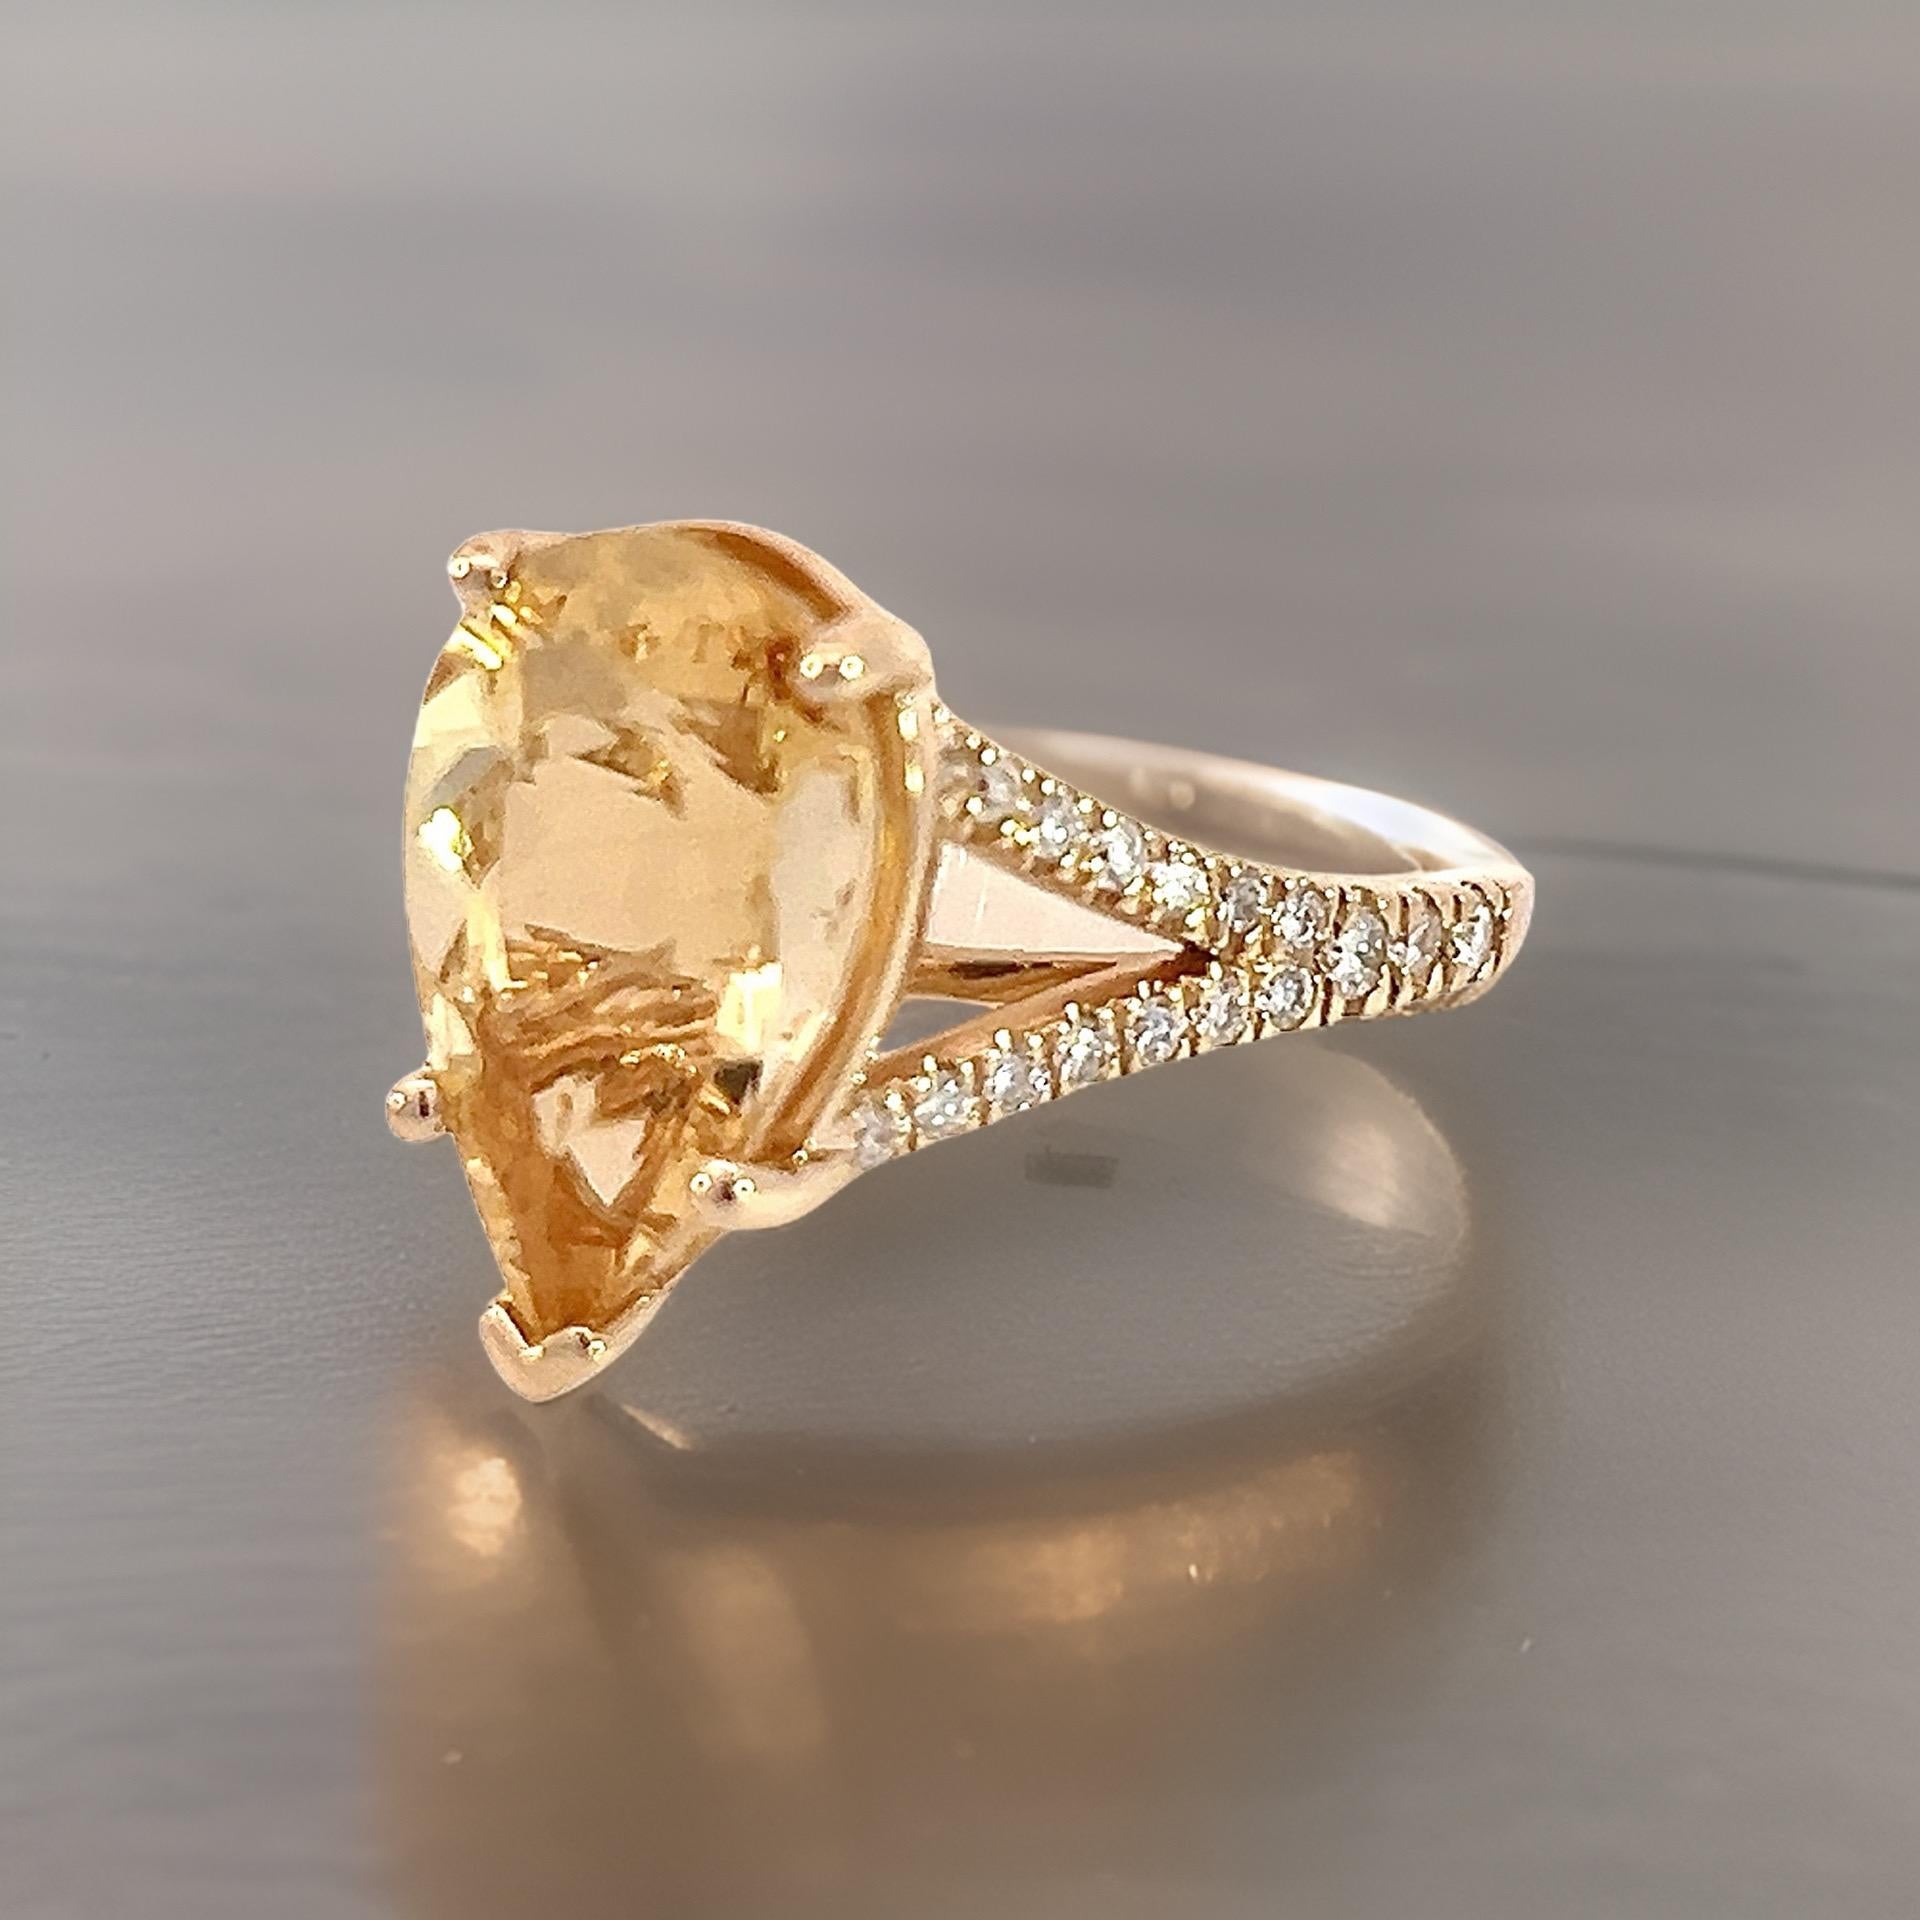 Natural Citrine Diamond Ring 6.5 14k Y Gold 4.79 TCW Certified For Sale 5